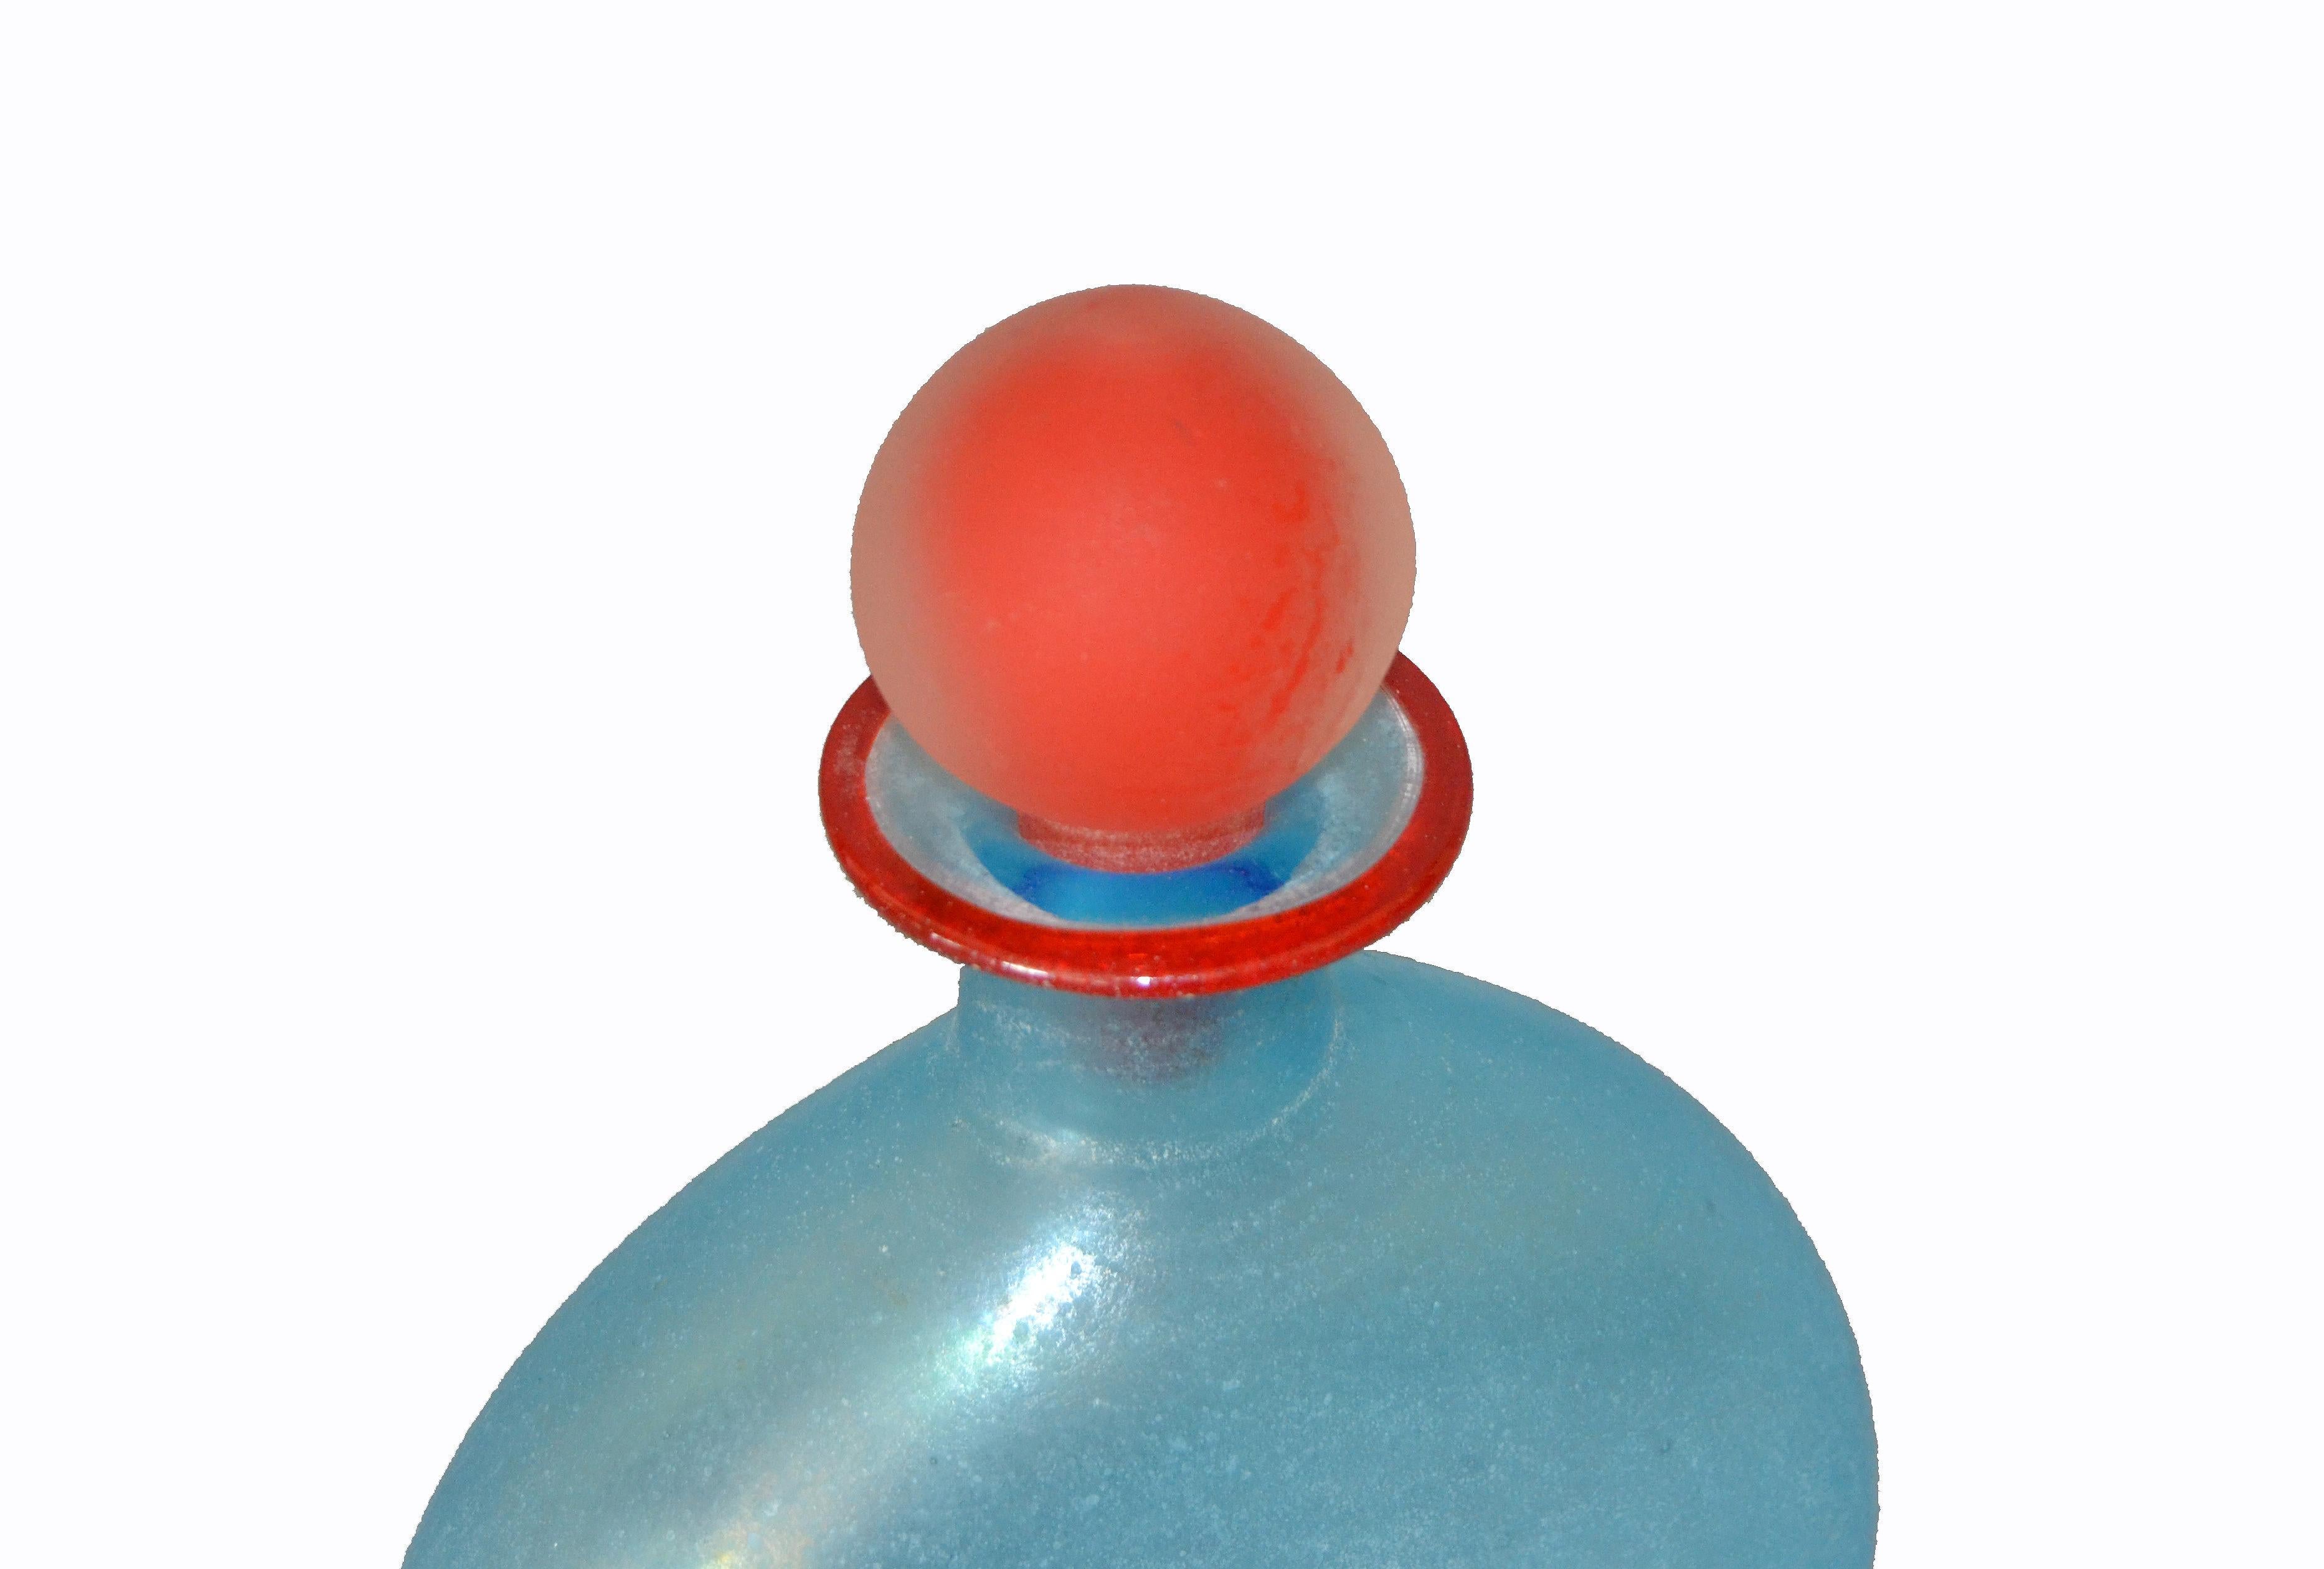 Italian Venetian Blue Murano Art Glass Decanter, Vessel with Red Stopper, Italy